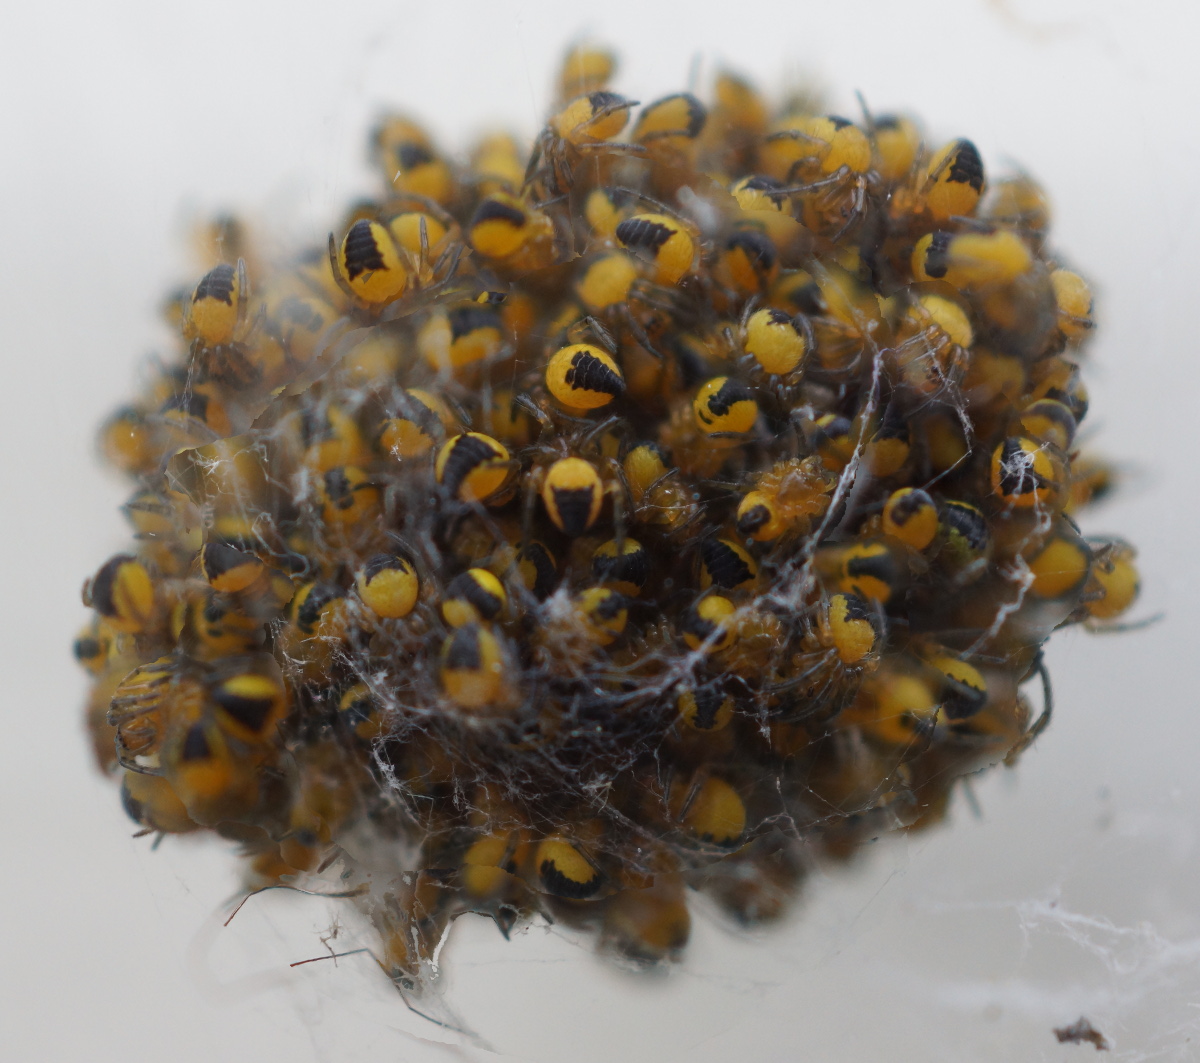 hatching house spiders